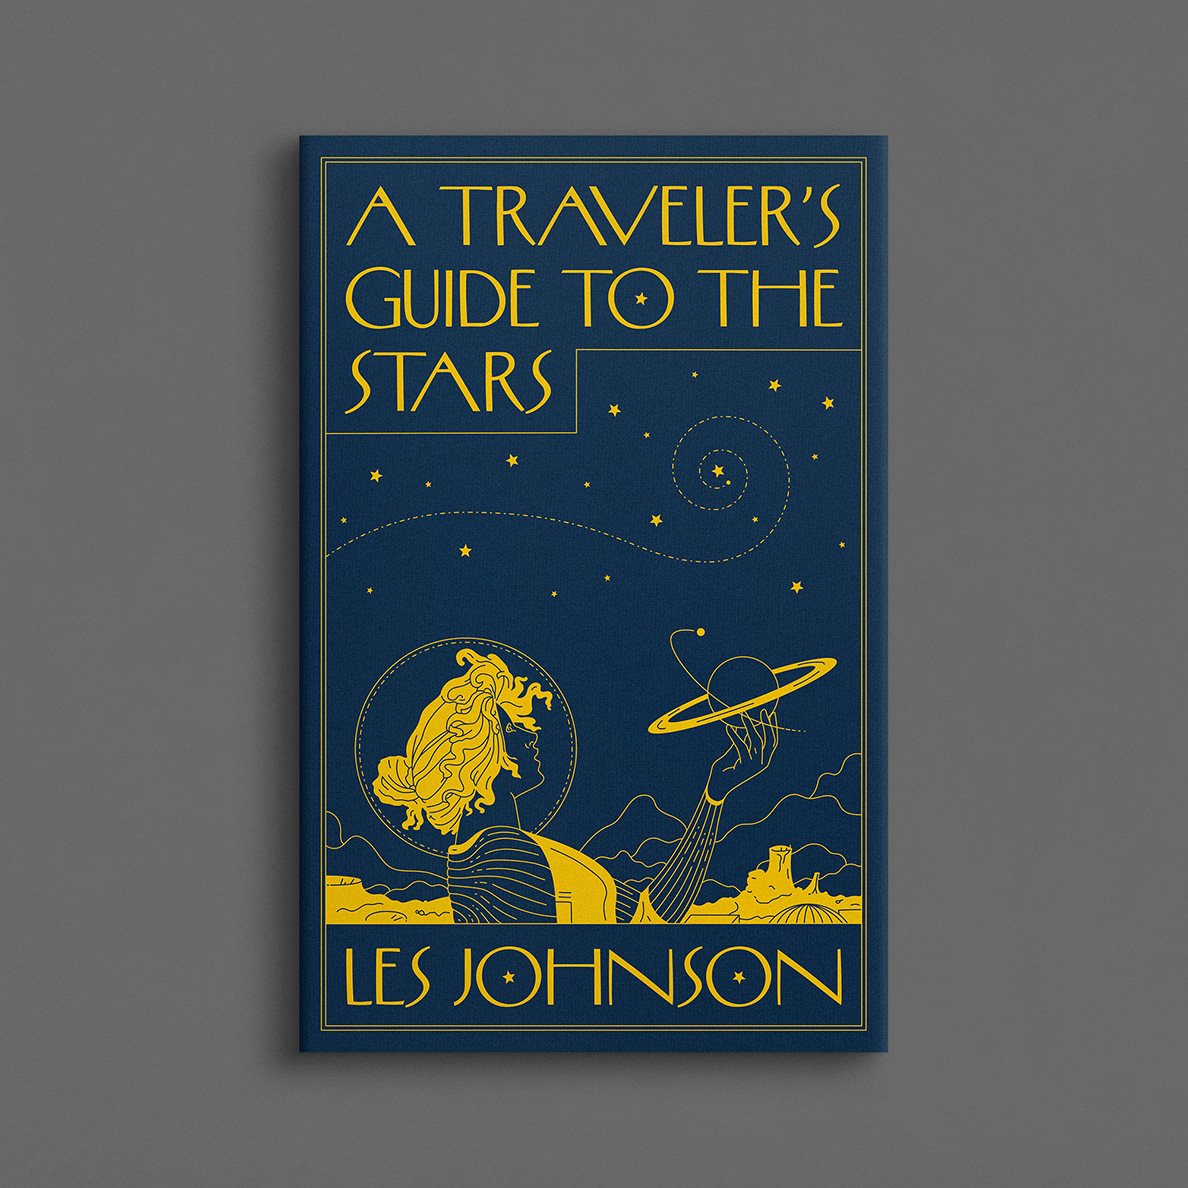 A Traveler's Guide to the Stars book cover